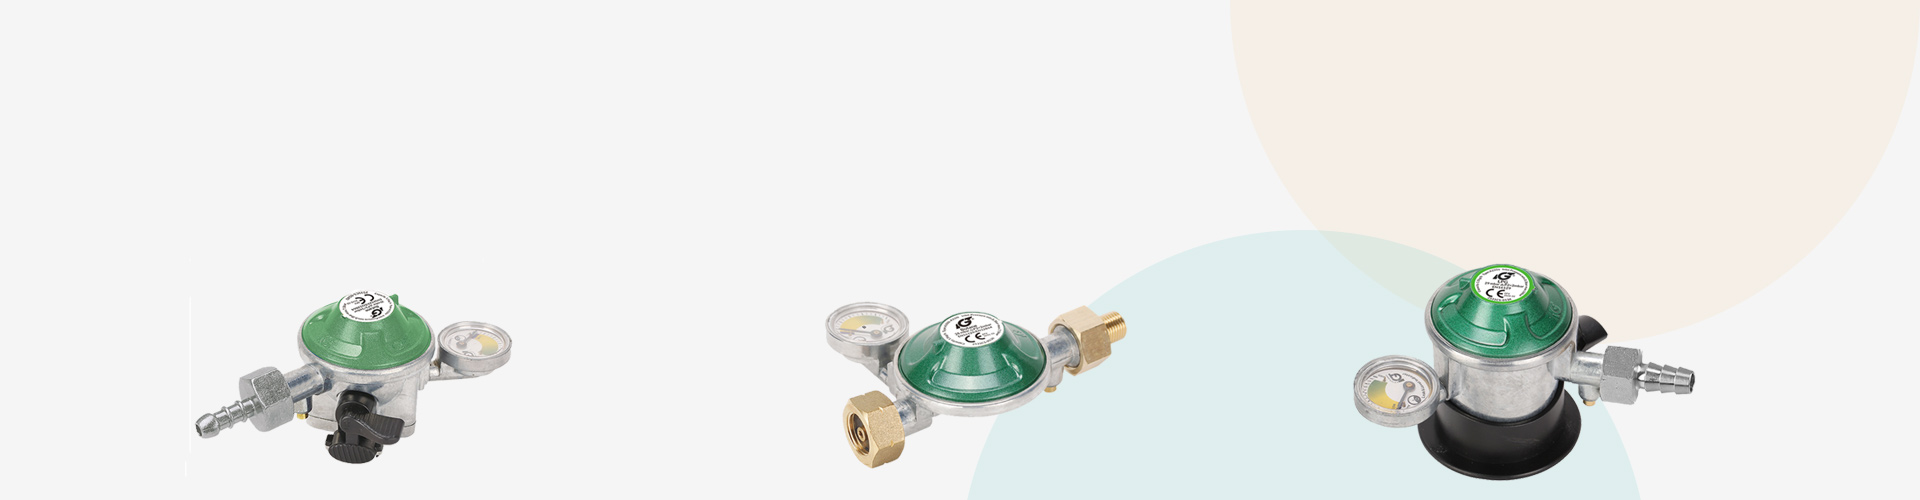 Navigating the Road to Safety: The Importance of Caravan Gas Regulators